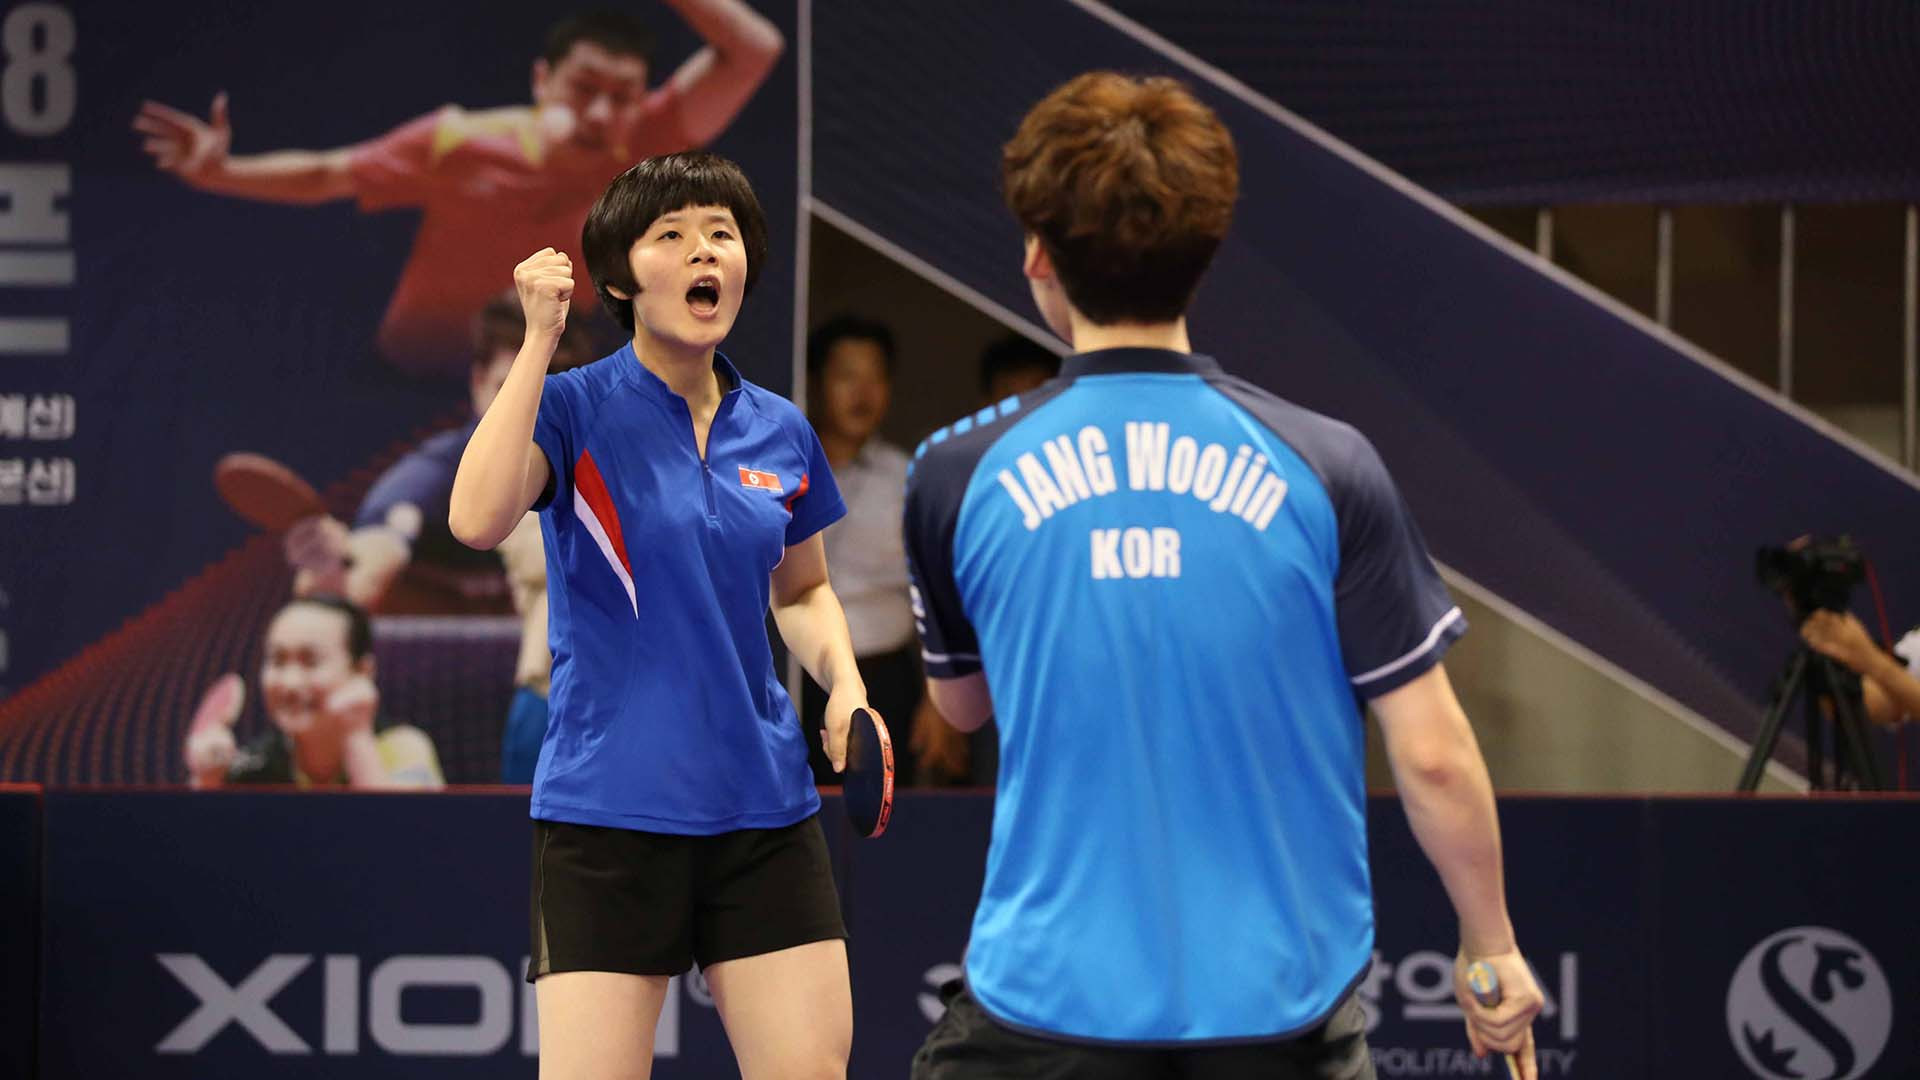 The unified Korean mixed doubles team of Jang Woojin and Cha Hyo Sim are into the final at the ITTF Korea Open ©An Sungho